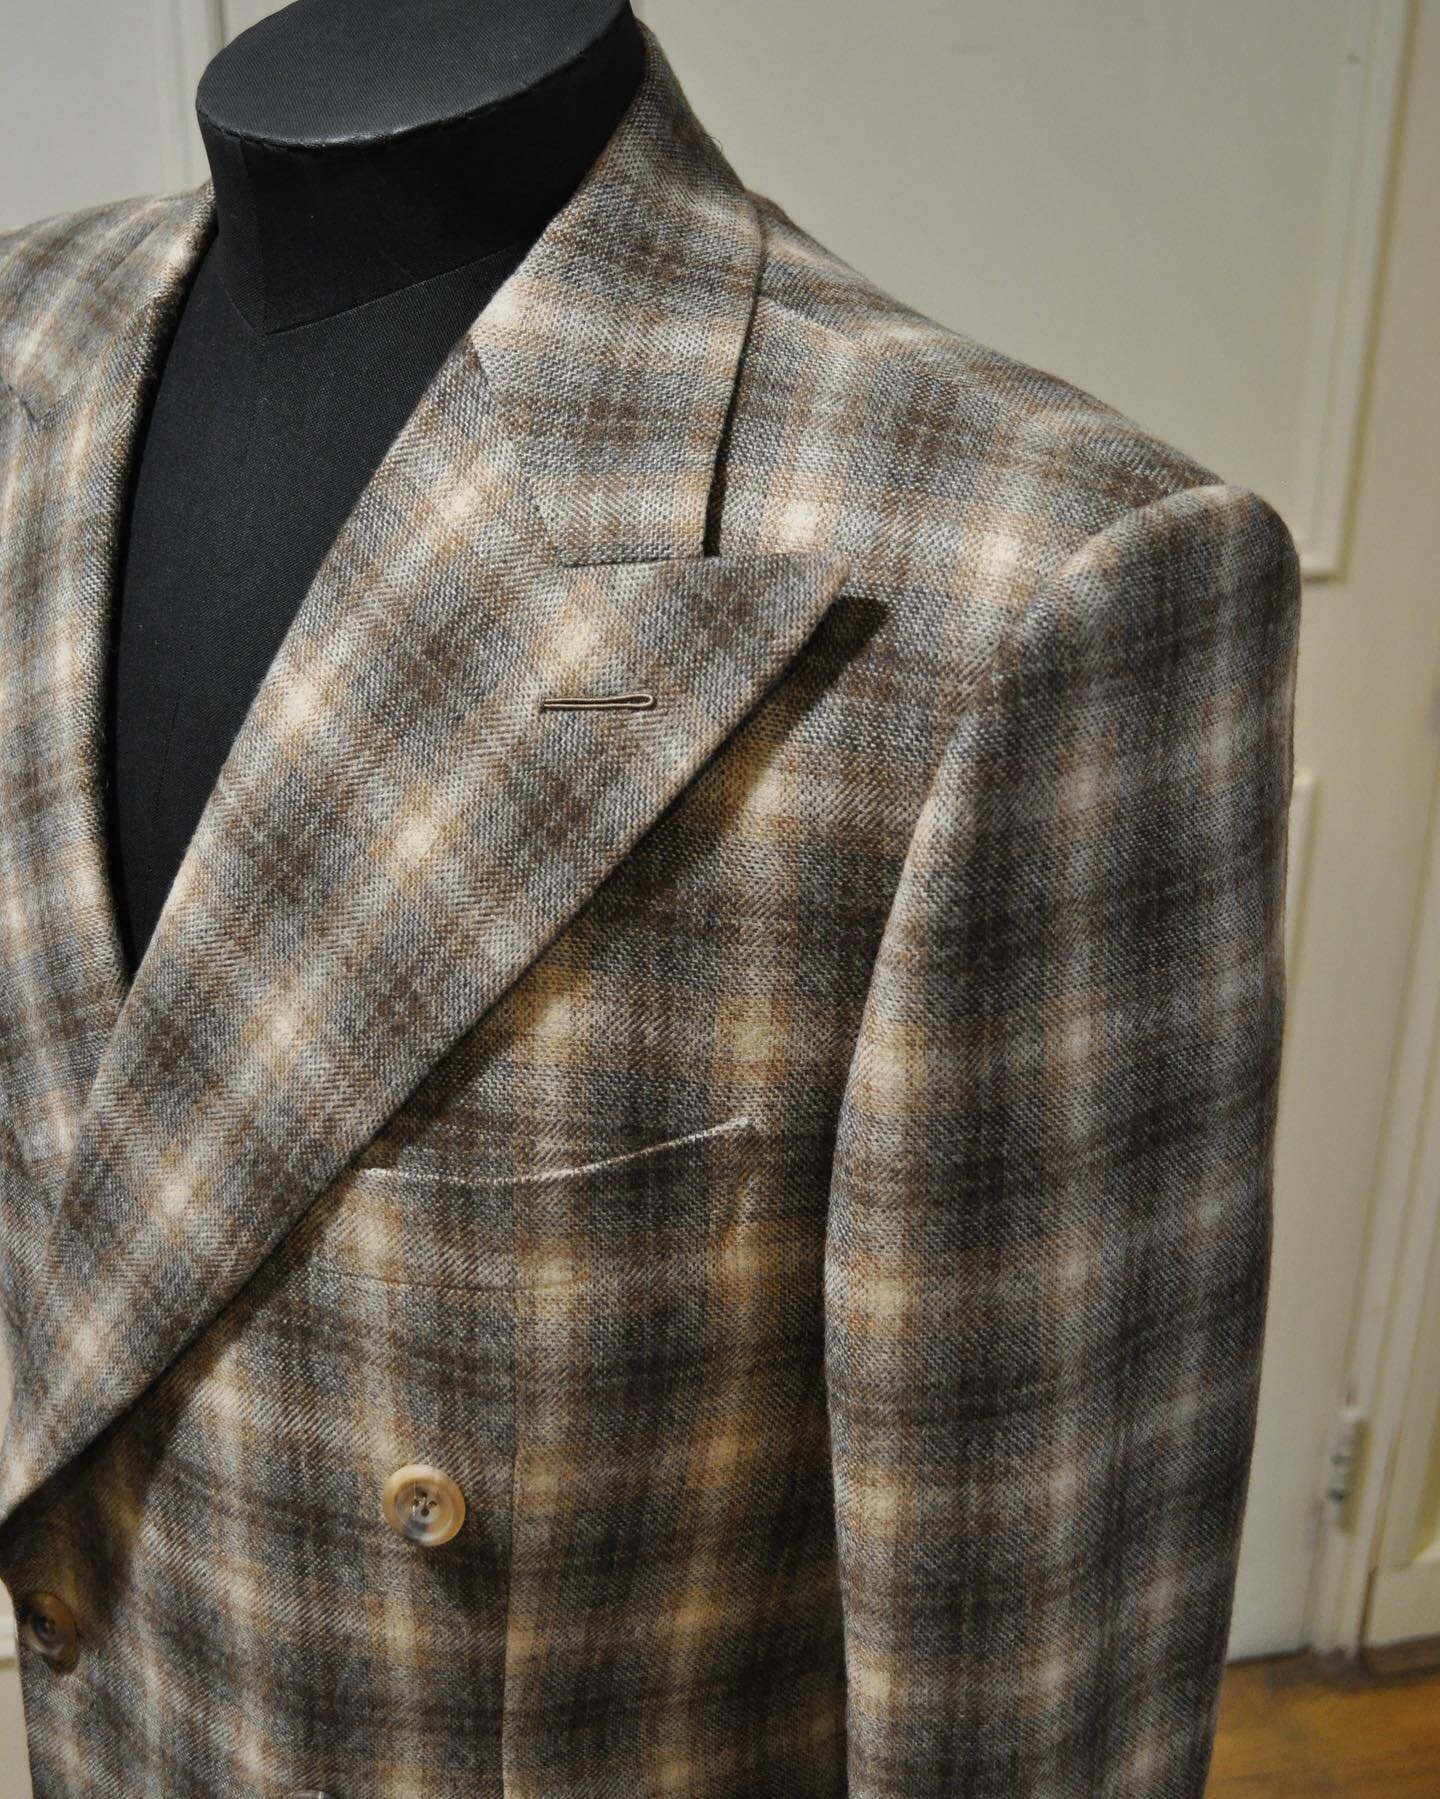 A double breasted sports jacket , cut in a vibrant check cloth from @no31.hollandandsherry . Great care is taken to ensure matching across all edges and areas . 

Along some seams, like the gorge, the match is largely down to luck and the angle of th